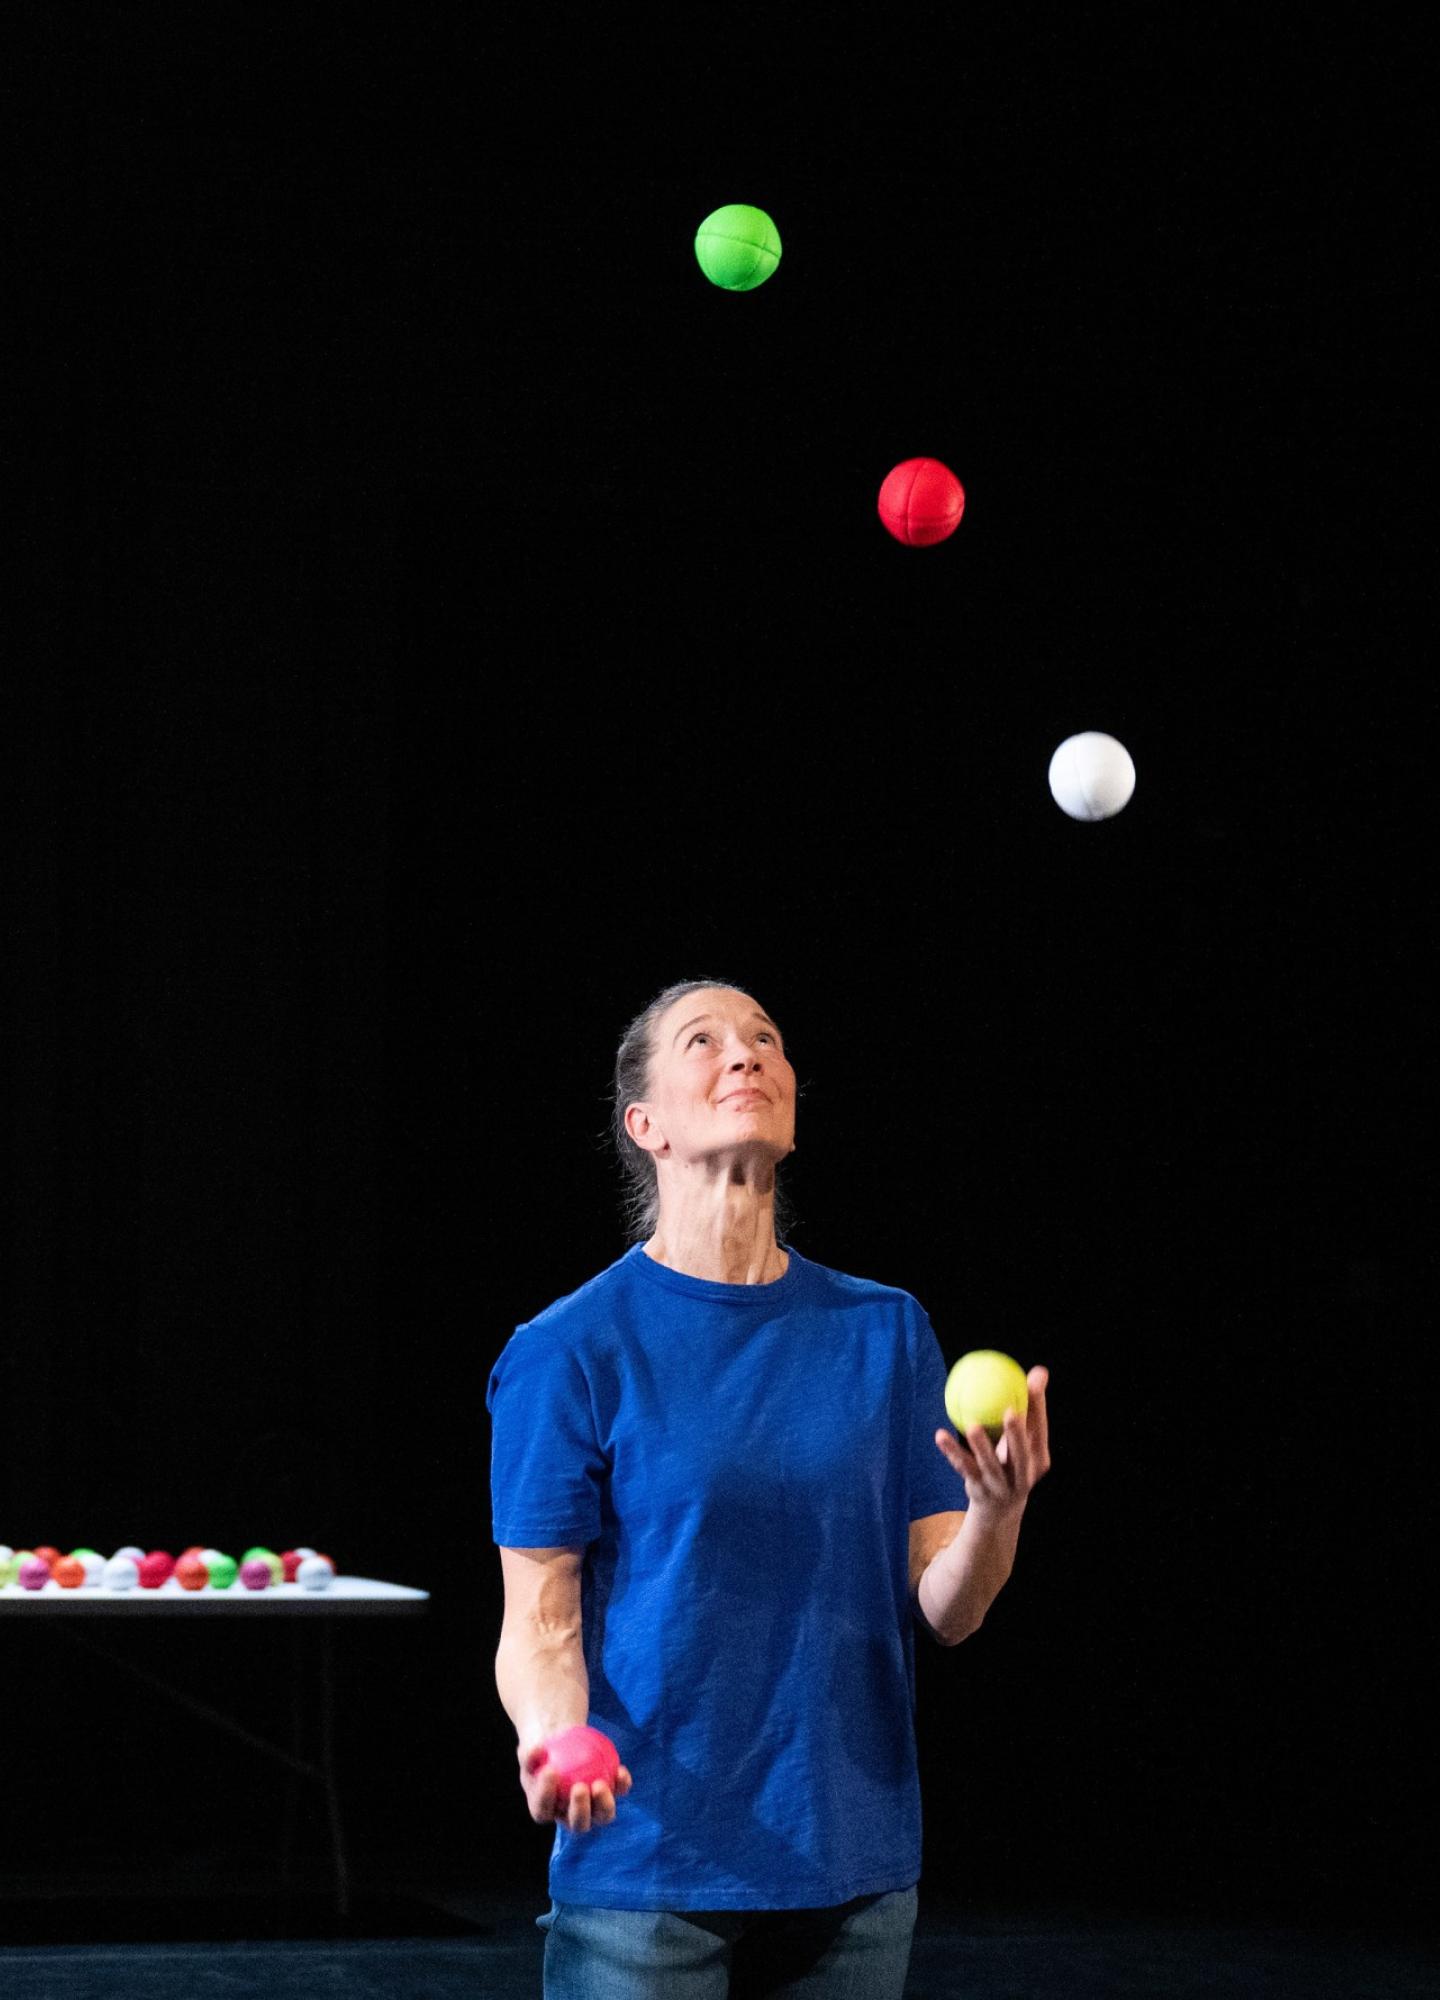 Two people, one of them is juggling